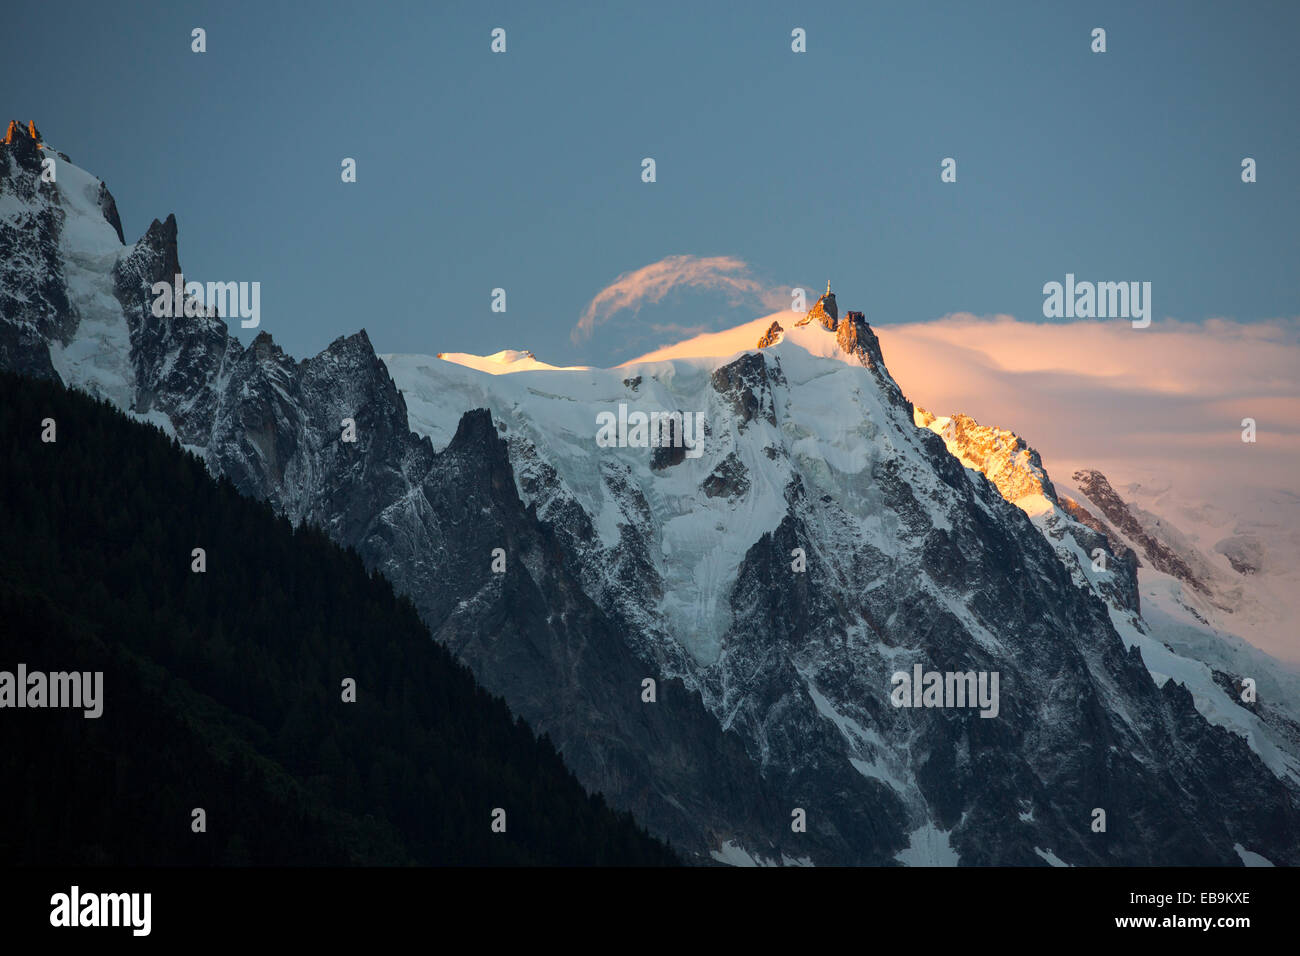 Dawn light on the Aiguille du midi in the Mont Blanc range above Chamonix, French Alps. Stock Photo